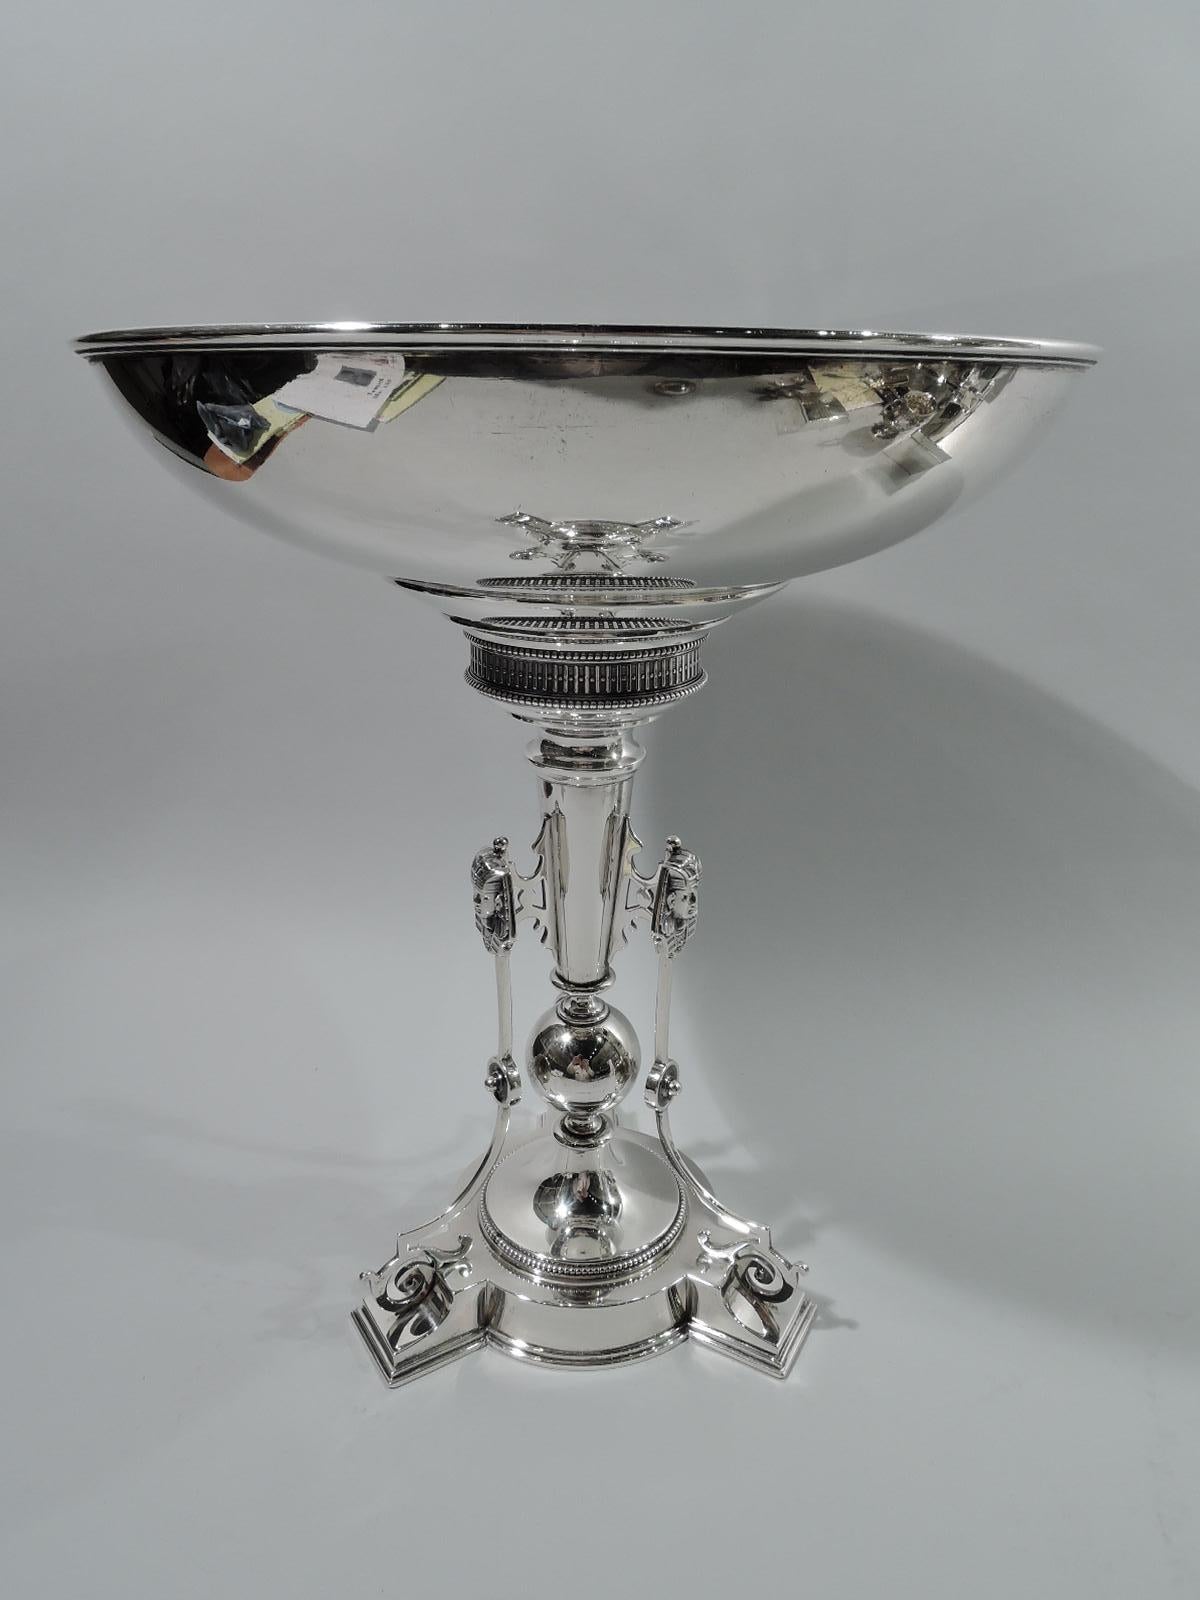 Egyptian Classical sterling silver compote. Made by John R. Wendt for Ball, Black & Co. in New York, ca 1870. Round and curved bowl on tapering columnar shaft on large ball knop mounted to raised and round tripod foot. Three scrolled brackets with